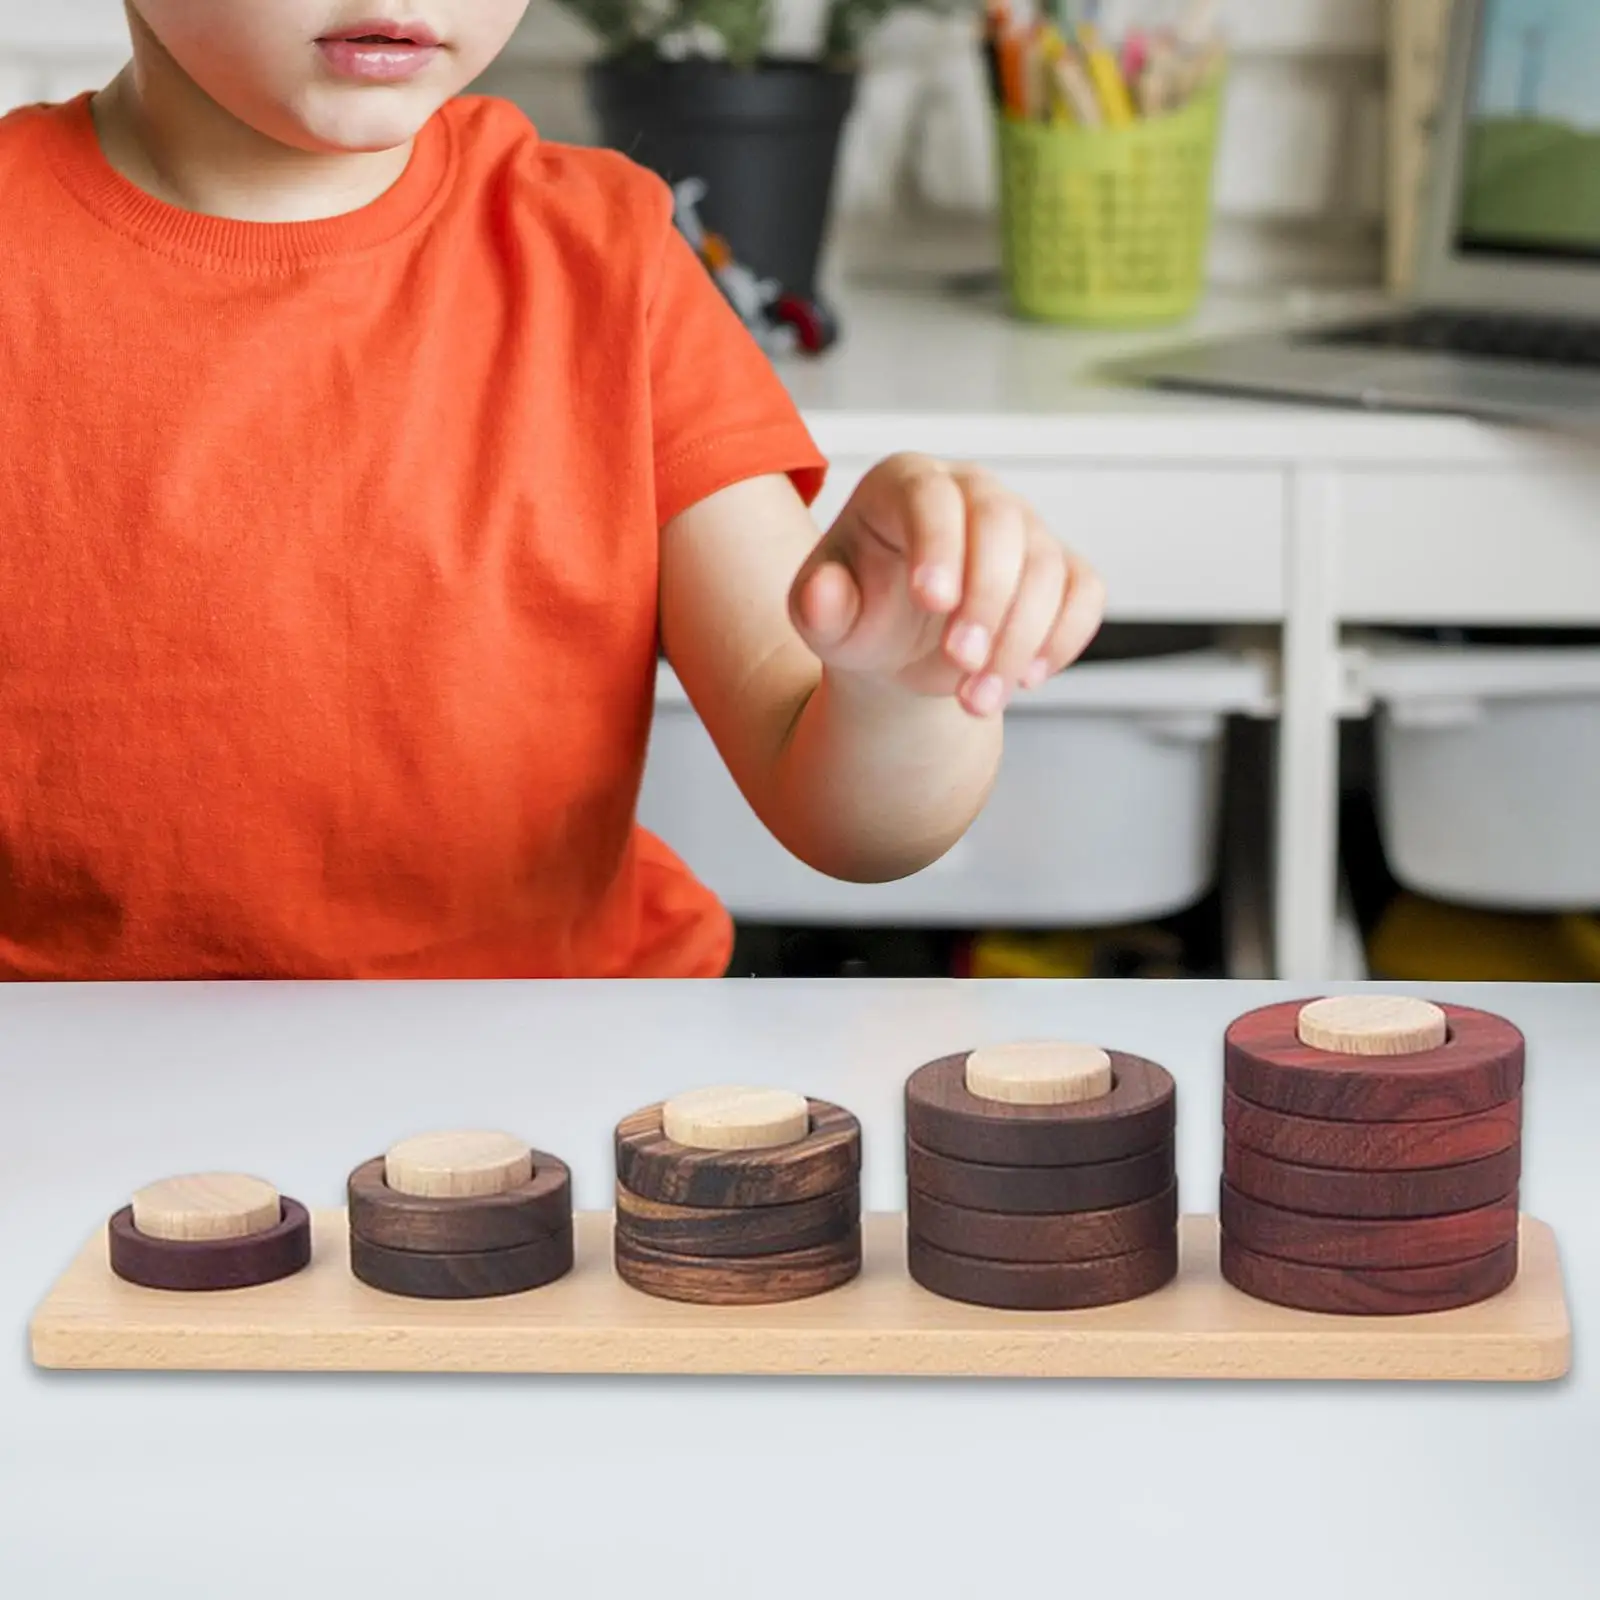 Montessori Stacking Toys Educational Learning Toy Preschool Learning Toys for Kids Girls Boy Toddlers Children Holiday Gifts